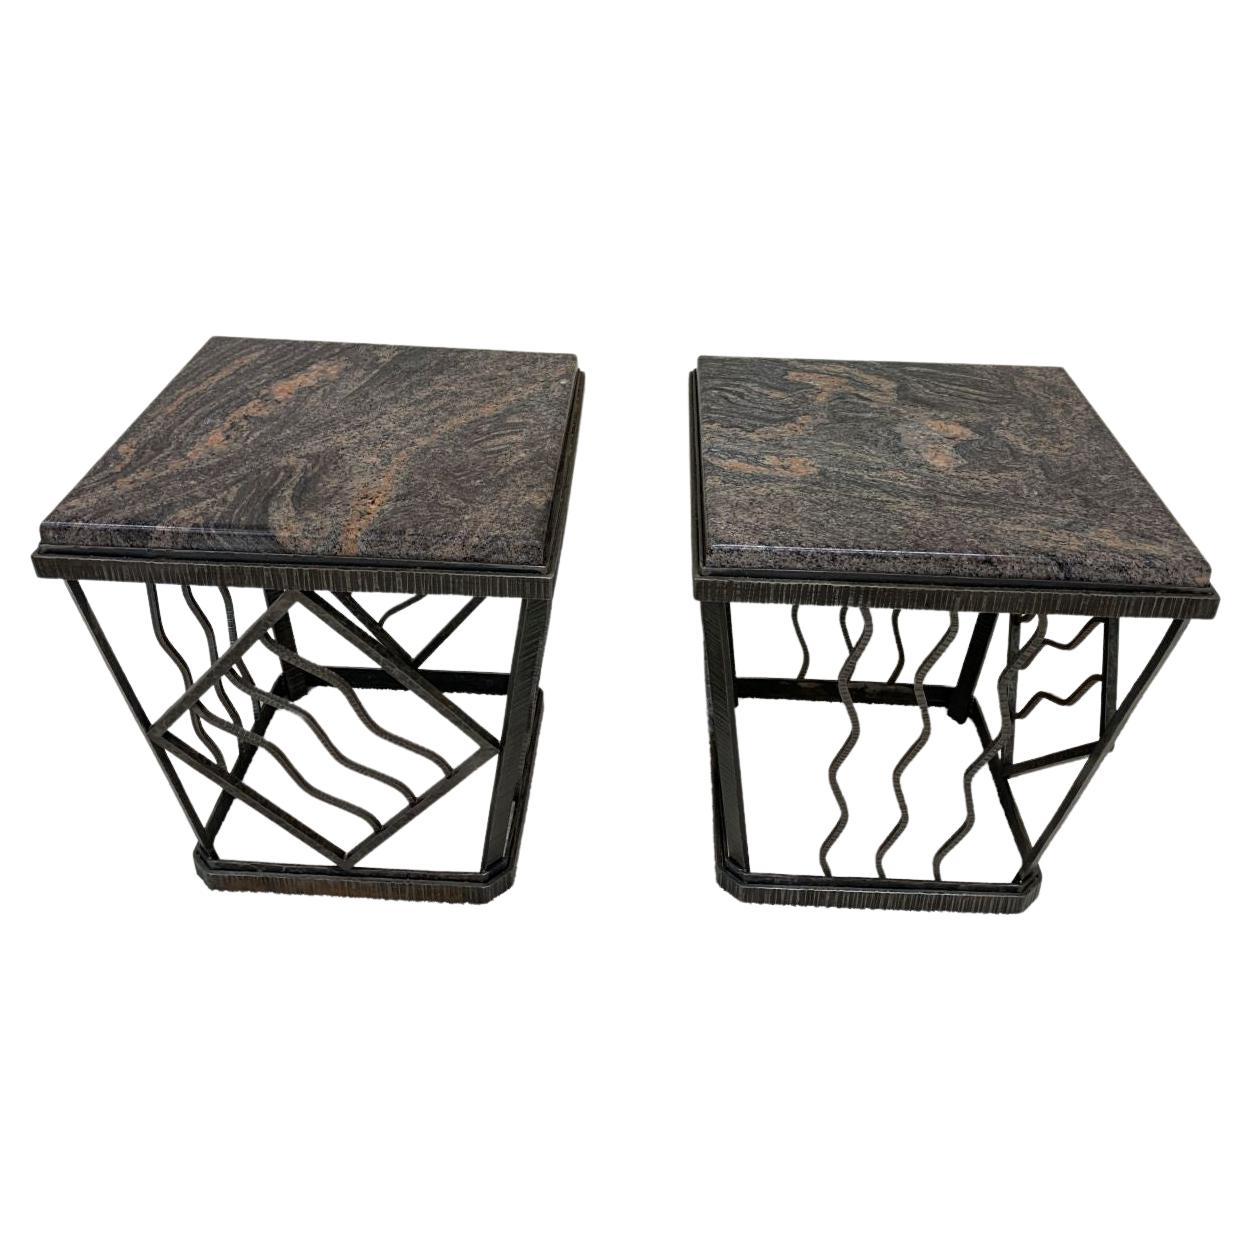 Pair of beautifully crafted Art Deco tables in the style of Oscar Bach. The bases are designed with an intricate iron pattern and with an elegant taper. Beautifully adorned with polished gray and earth tone marble tops. The tables are signed C.